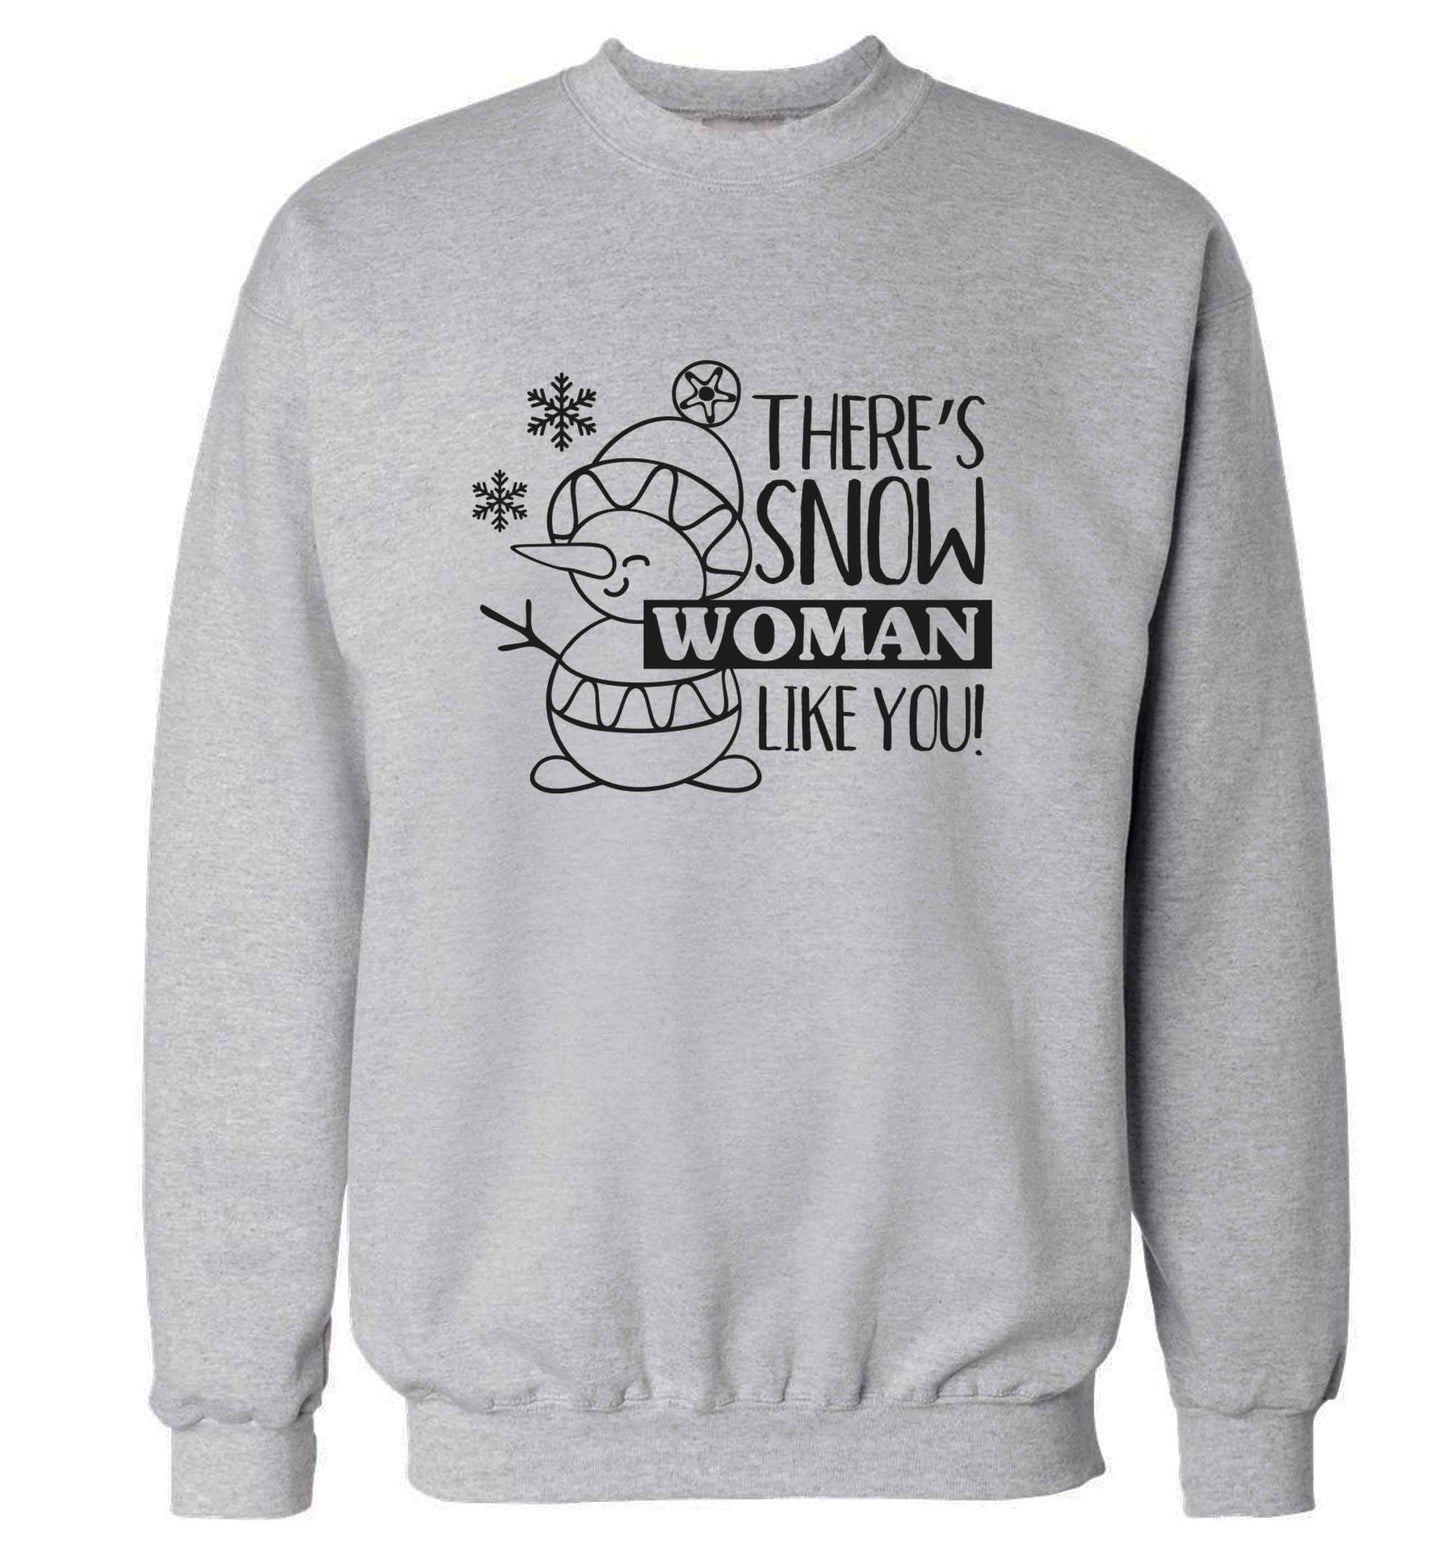 There's snow woman like you adult's unisex grey sweater 2XL